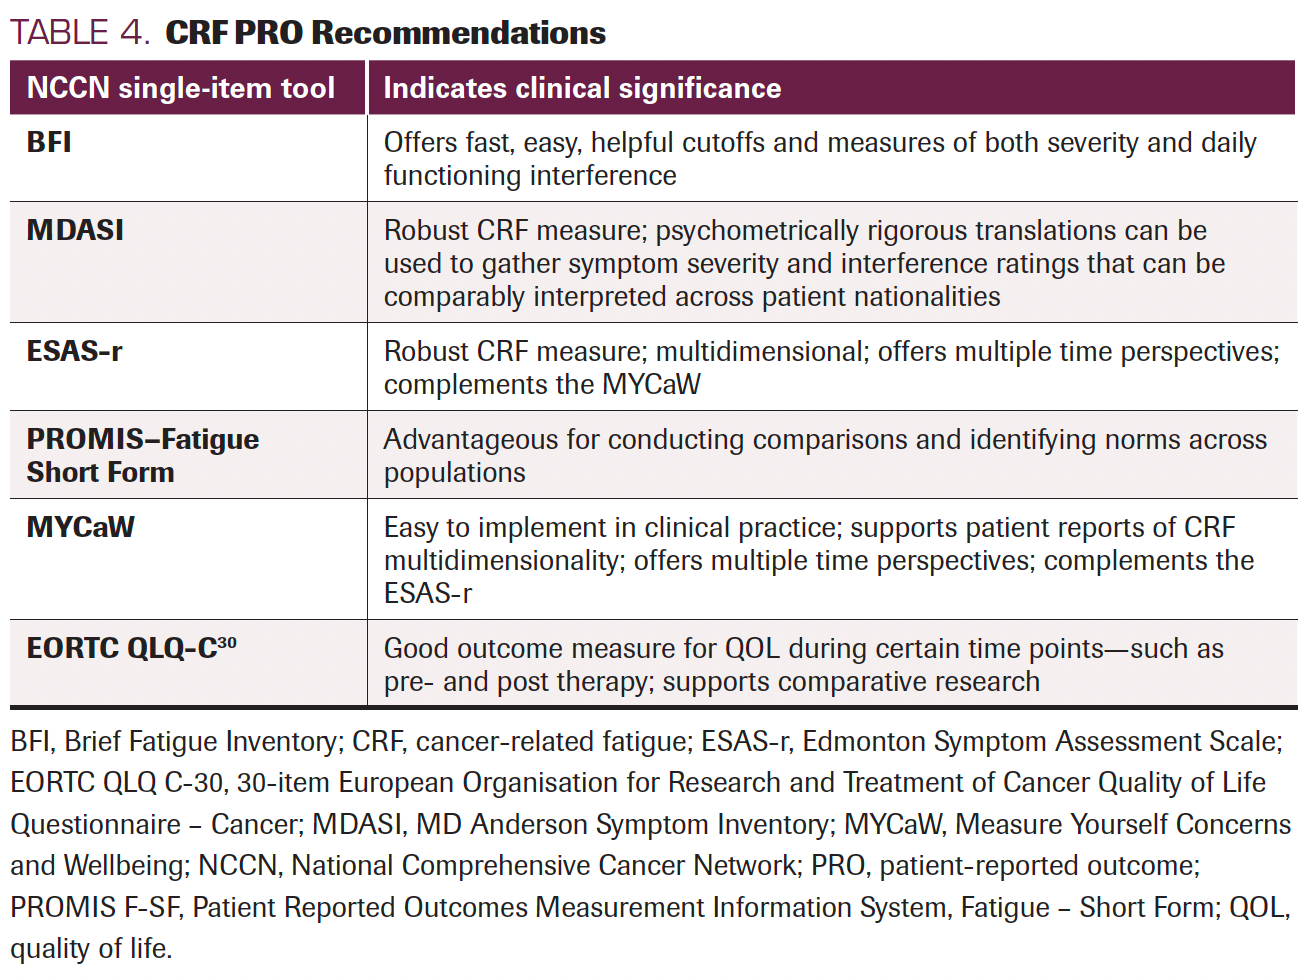 TABLE 4. CRF PRO Recommendations